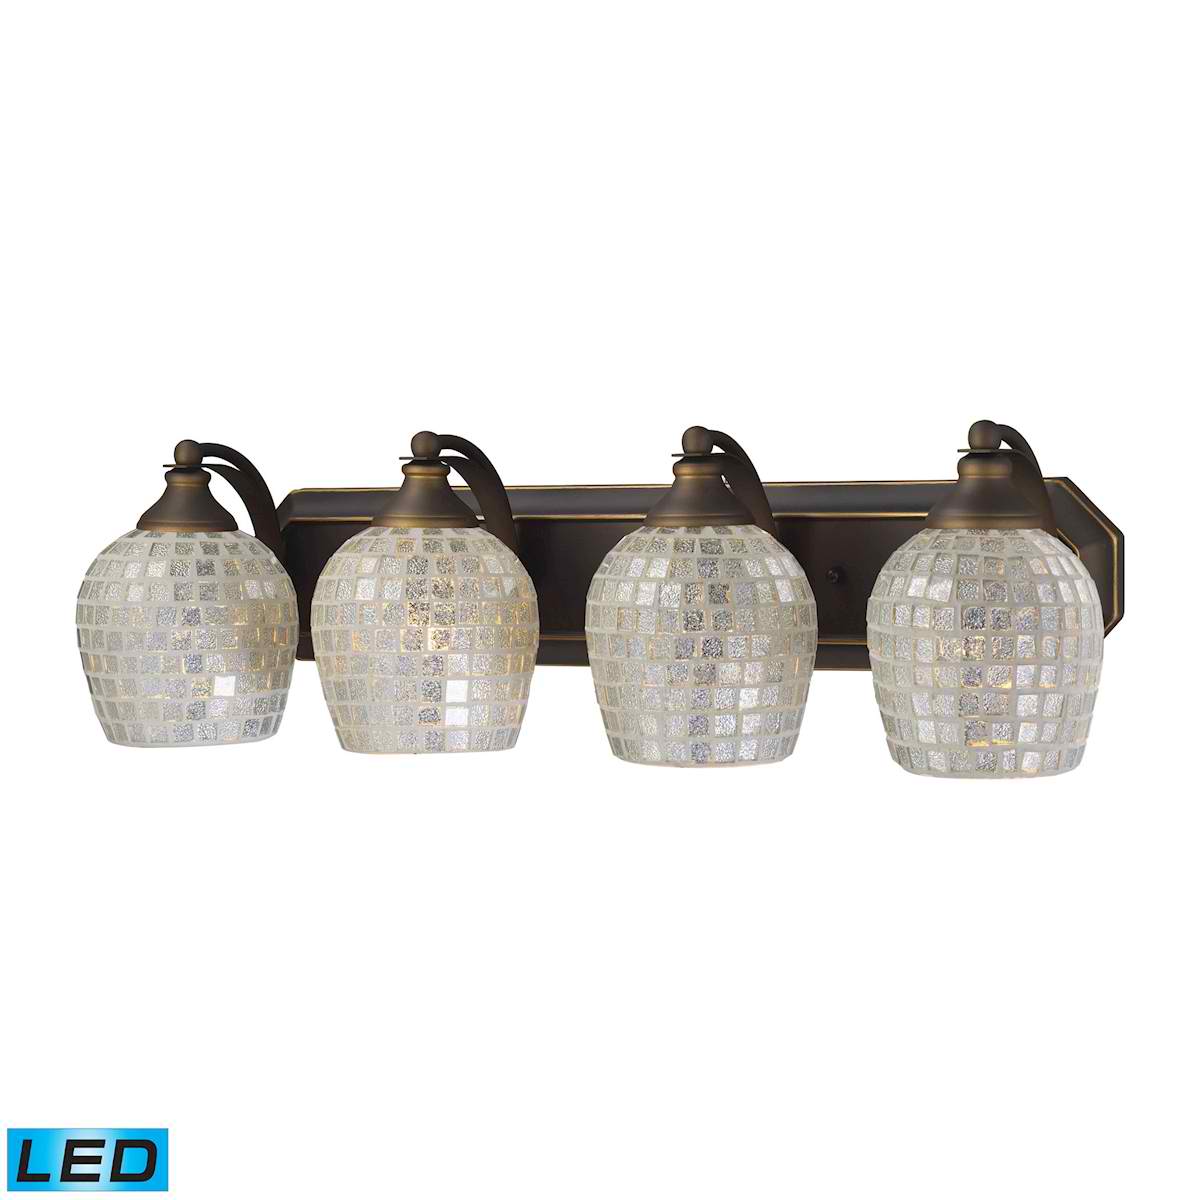 4 Light Vanity in Aged Bronze and Silver Mosaic Glass - LED, 800 Lumens (3200 Lumens Total) with Full Scale